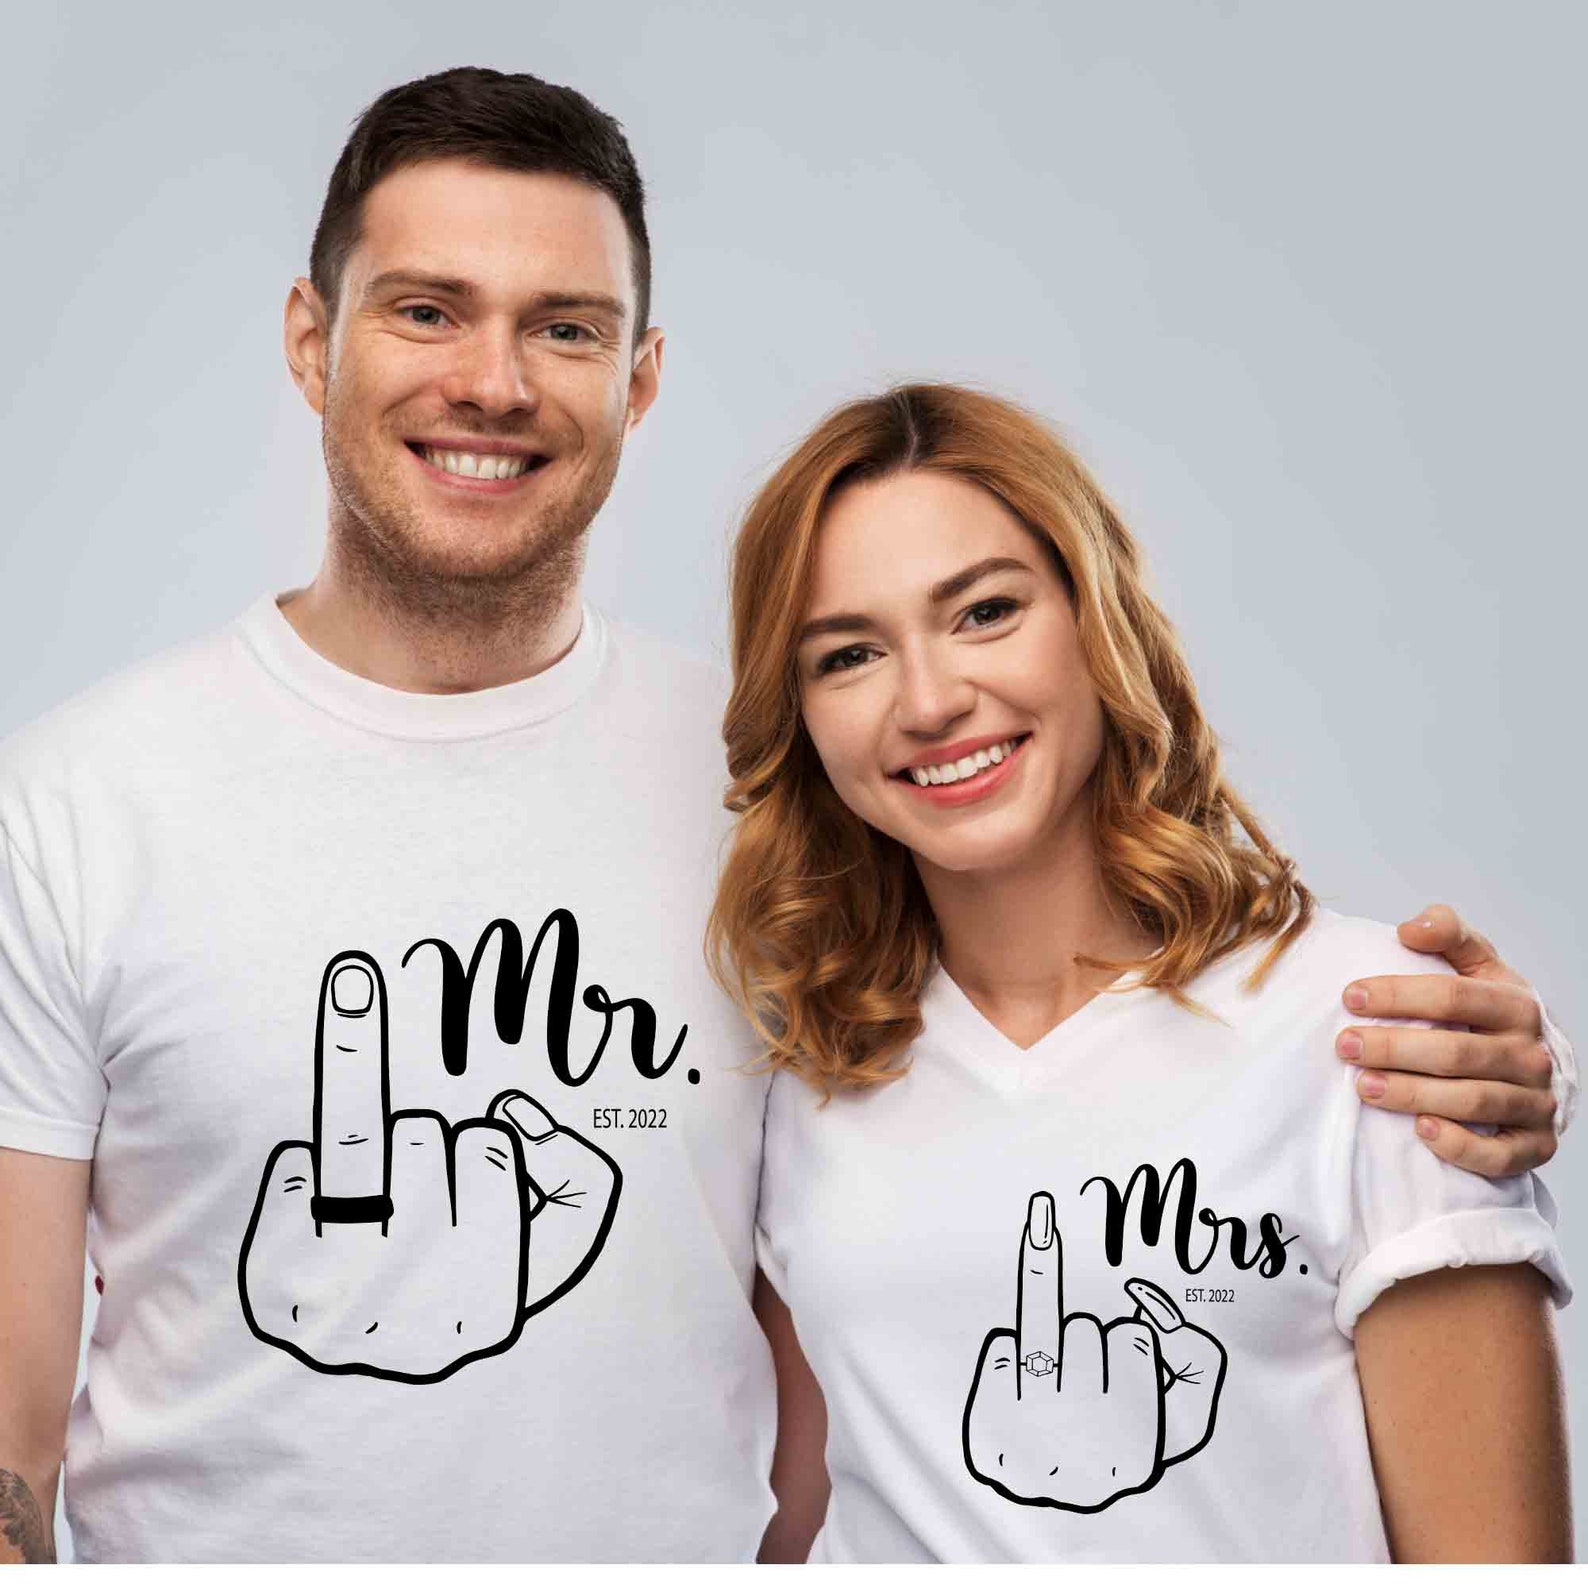 White t-shirt with wedding finger.